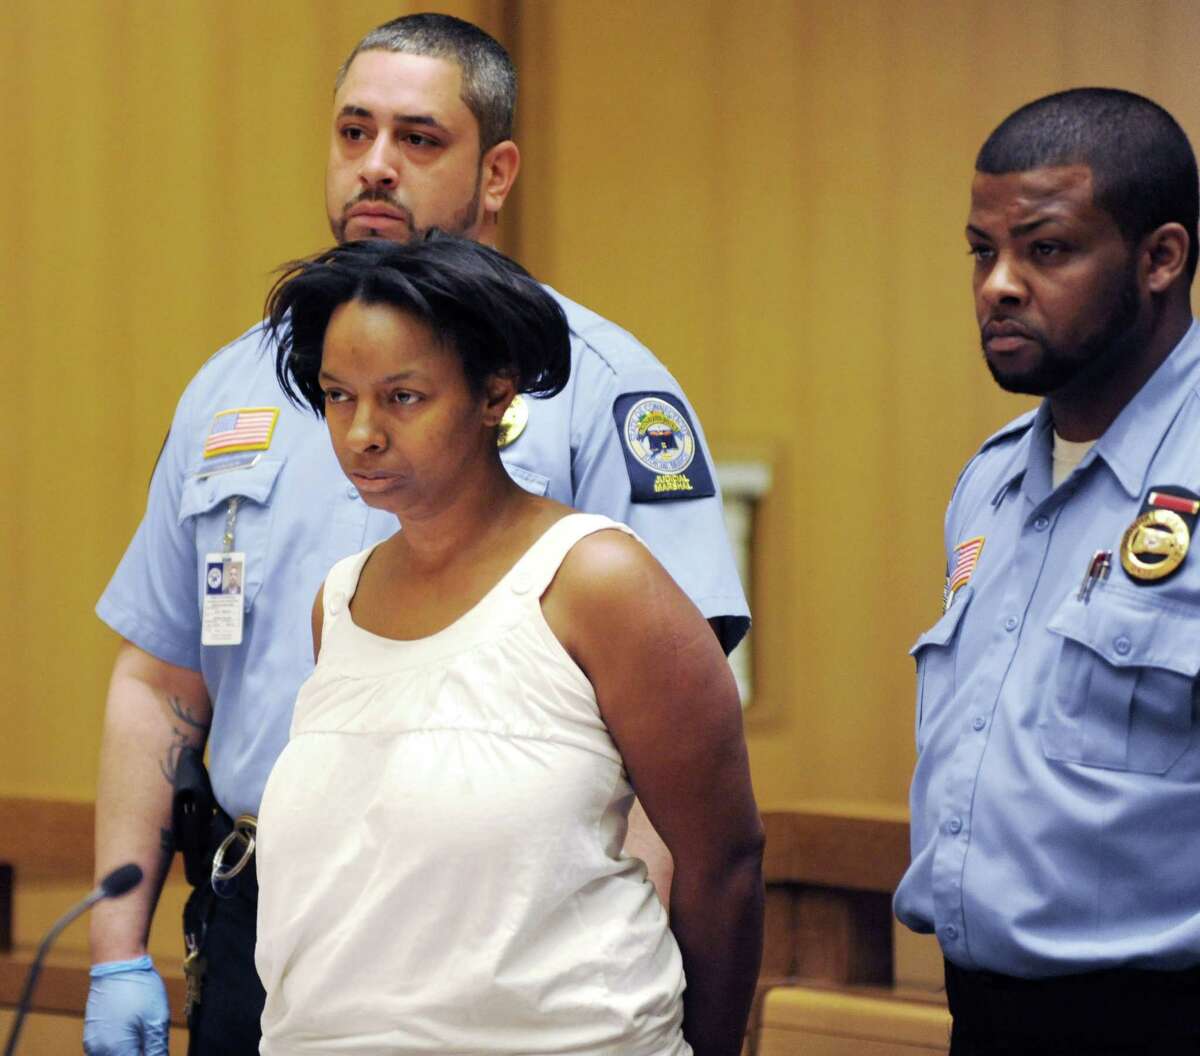 Suspect Yolanda McDowell, 45, of Durant St., Stamford is arraigned on Monday April 21, 2014 at state superior court in Stamford, Conn in last night's hit-and-run that killed a 70-year-old woman.Victim was mother of SPD 2002 Officer of the Year Angel Gonzales.